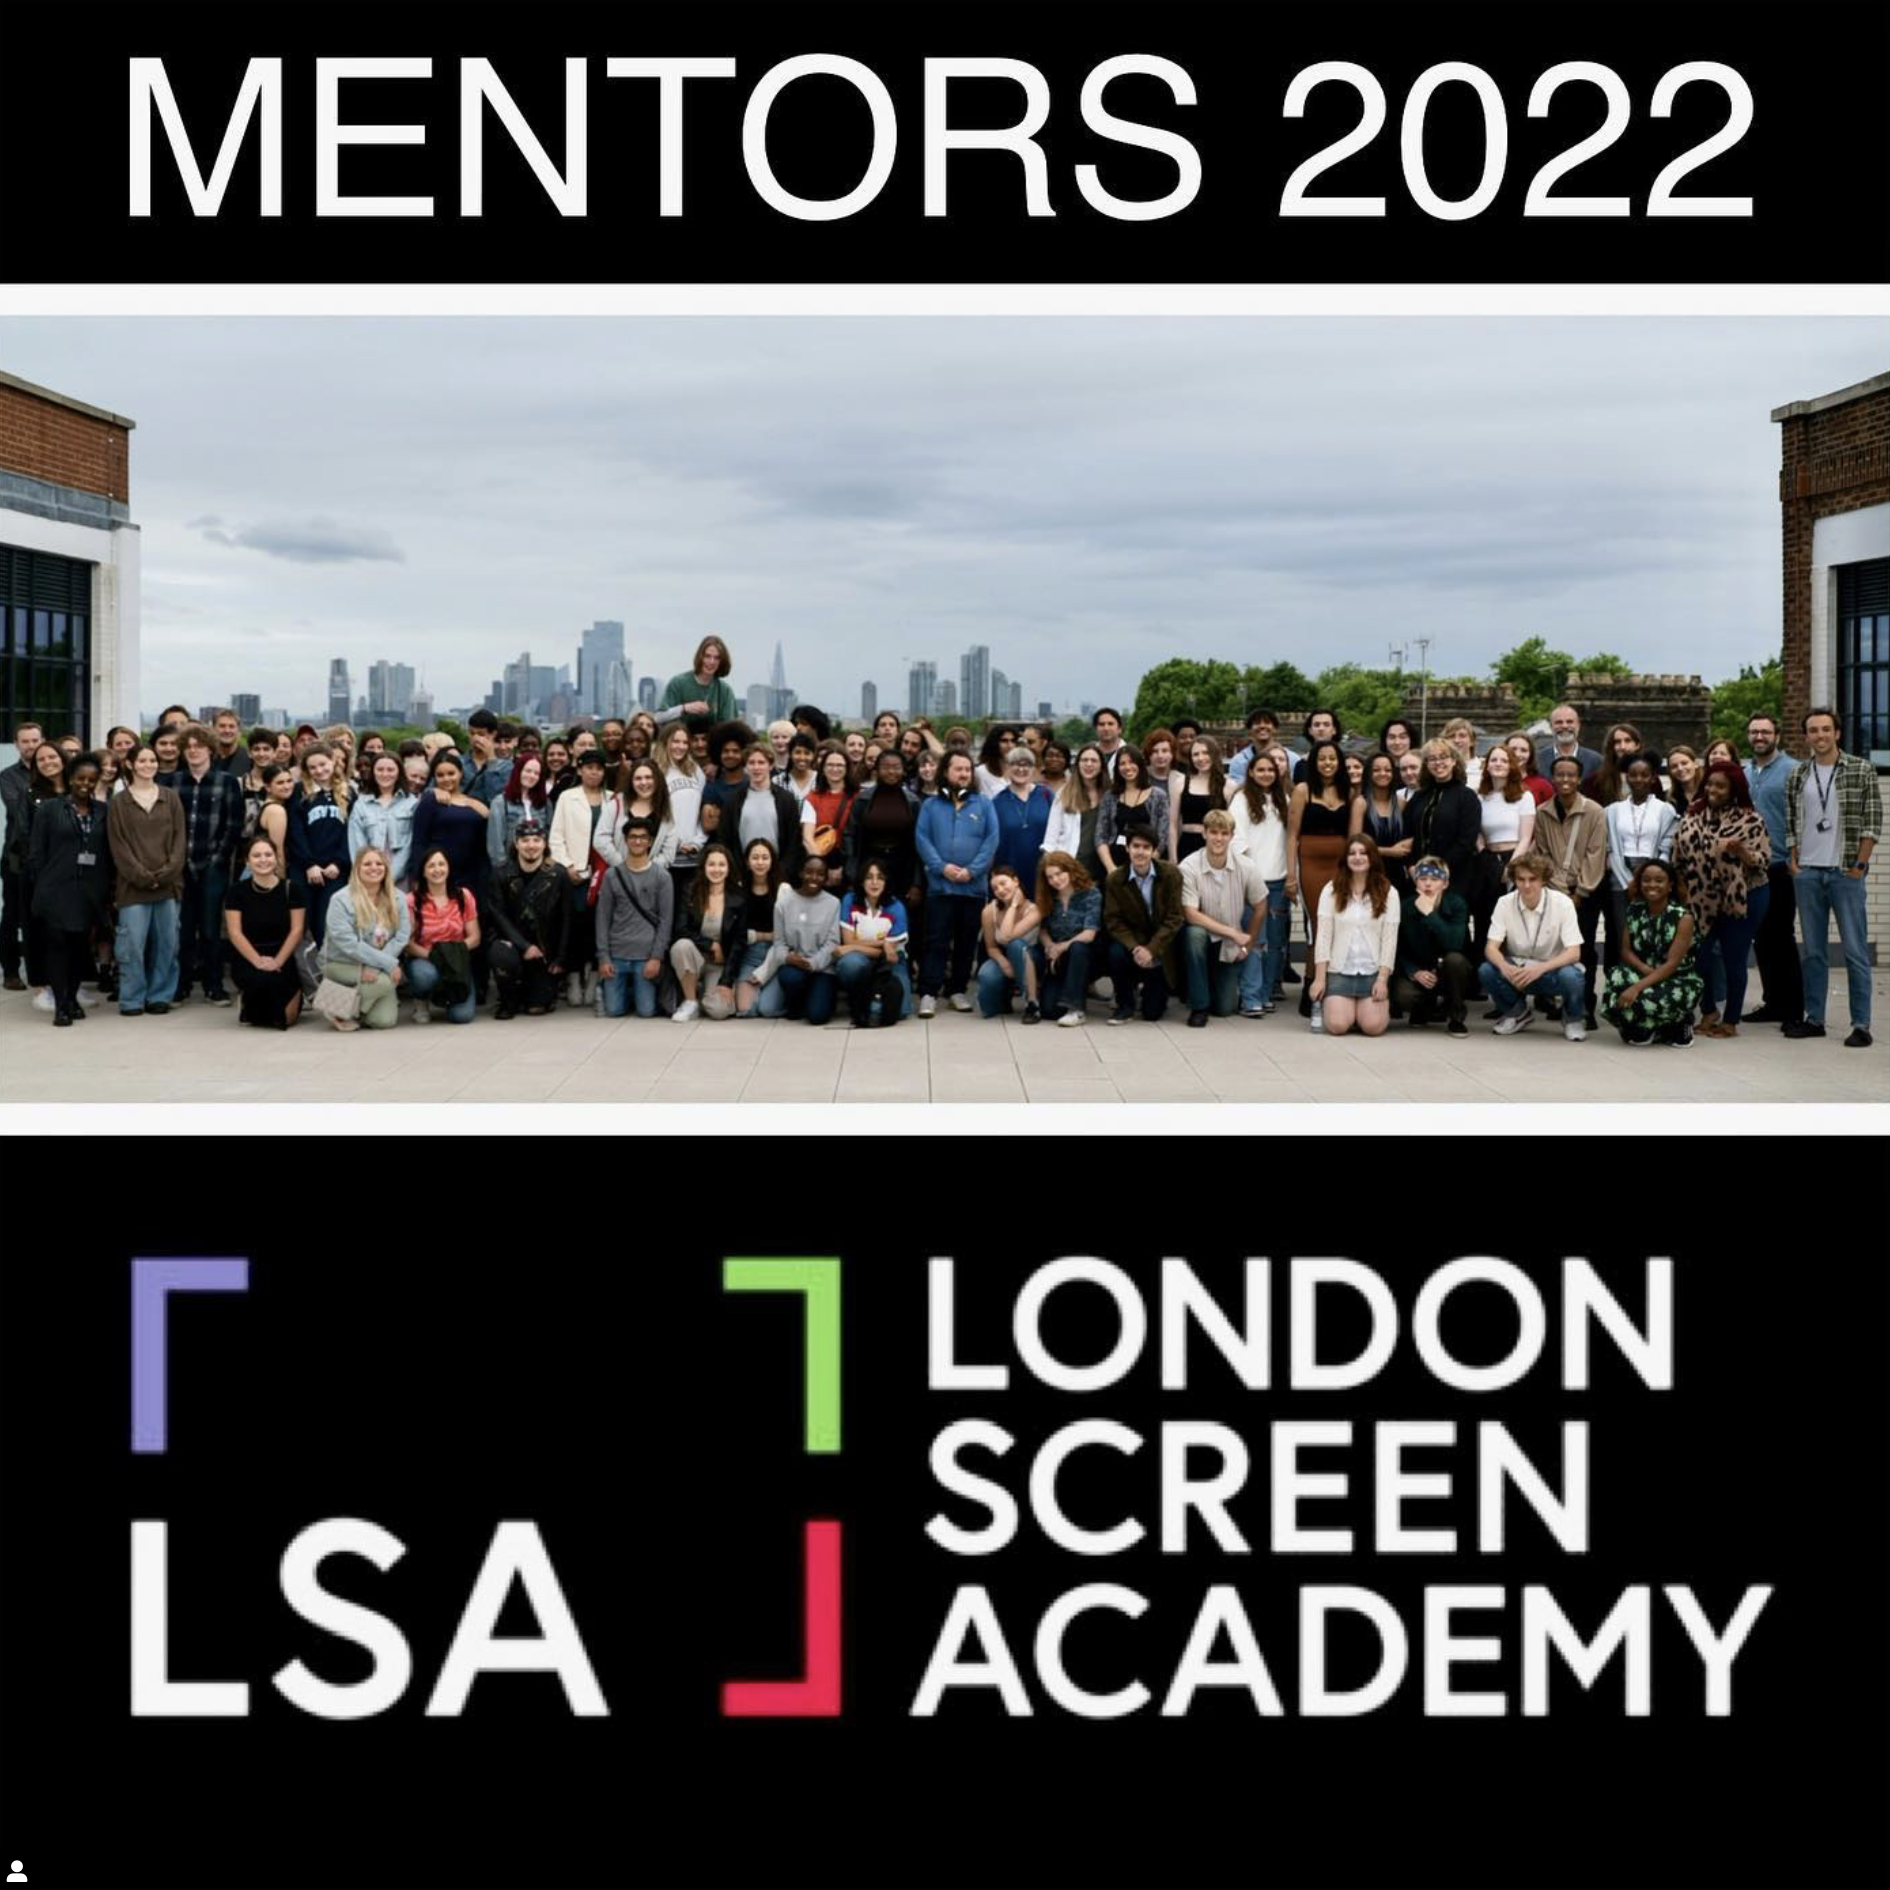 VERY PROUD TO BE MENTOR AT LONDON SCREEN ACADEMY